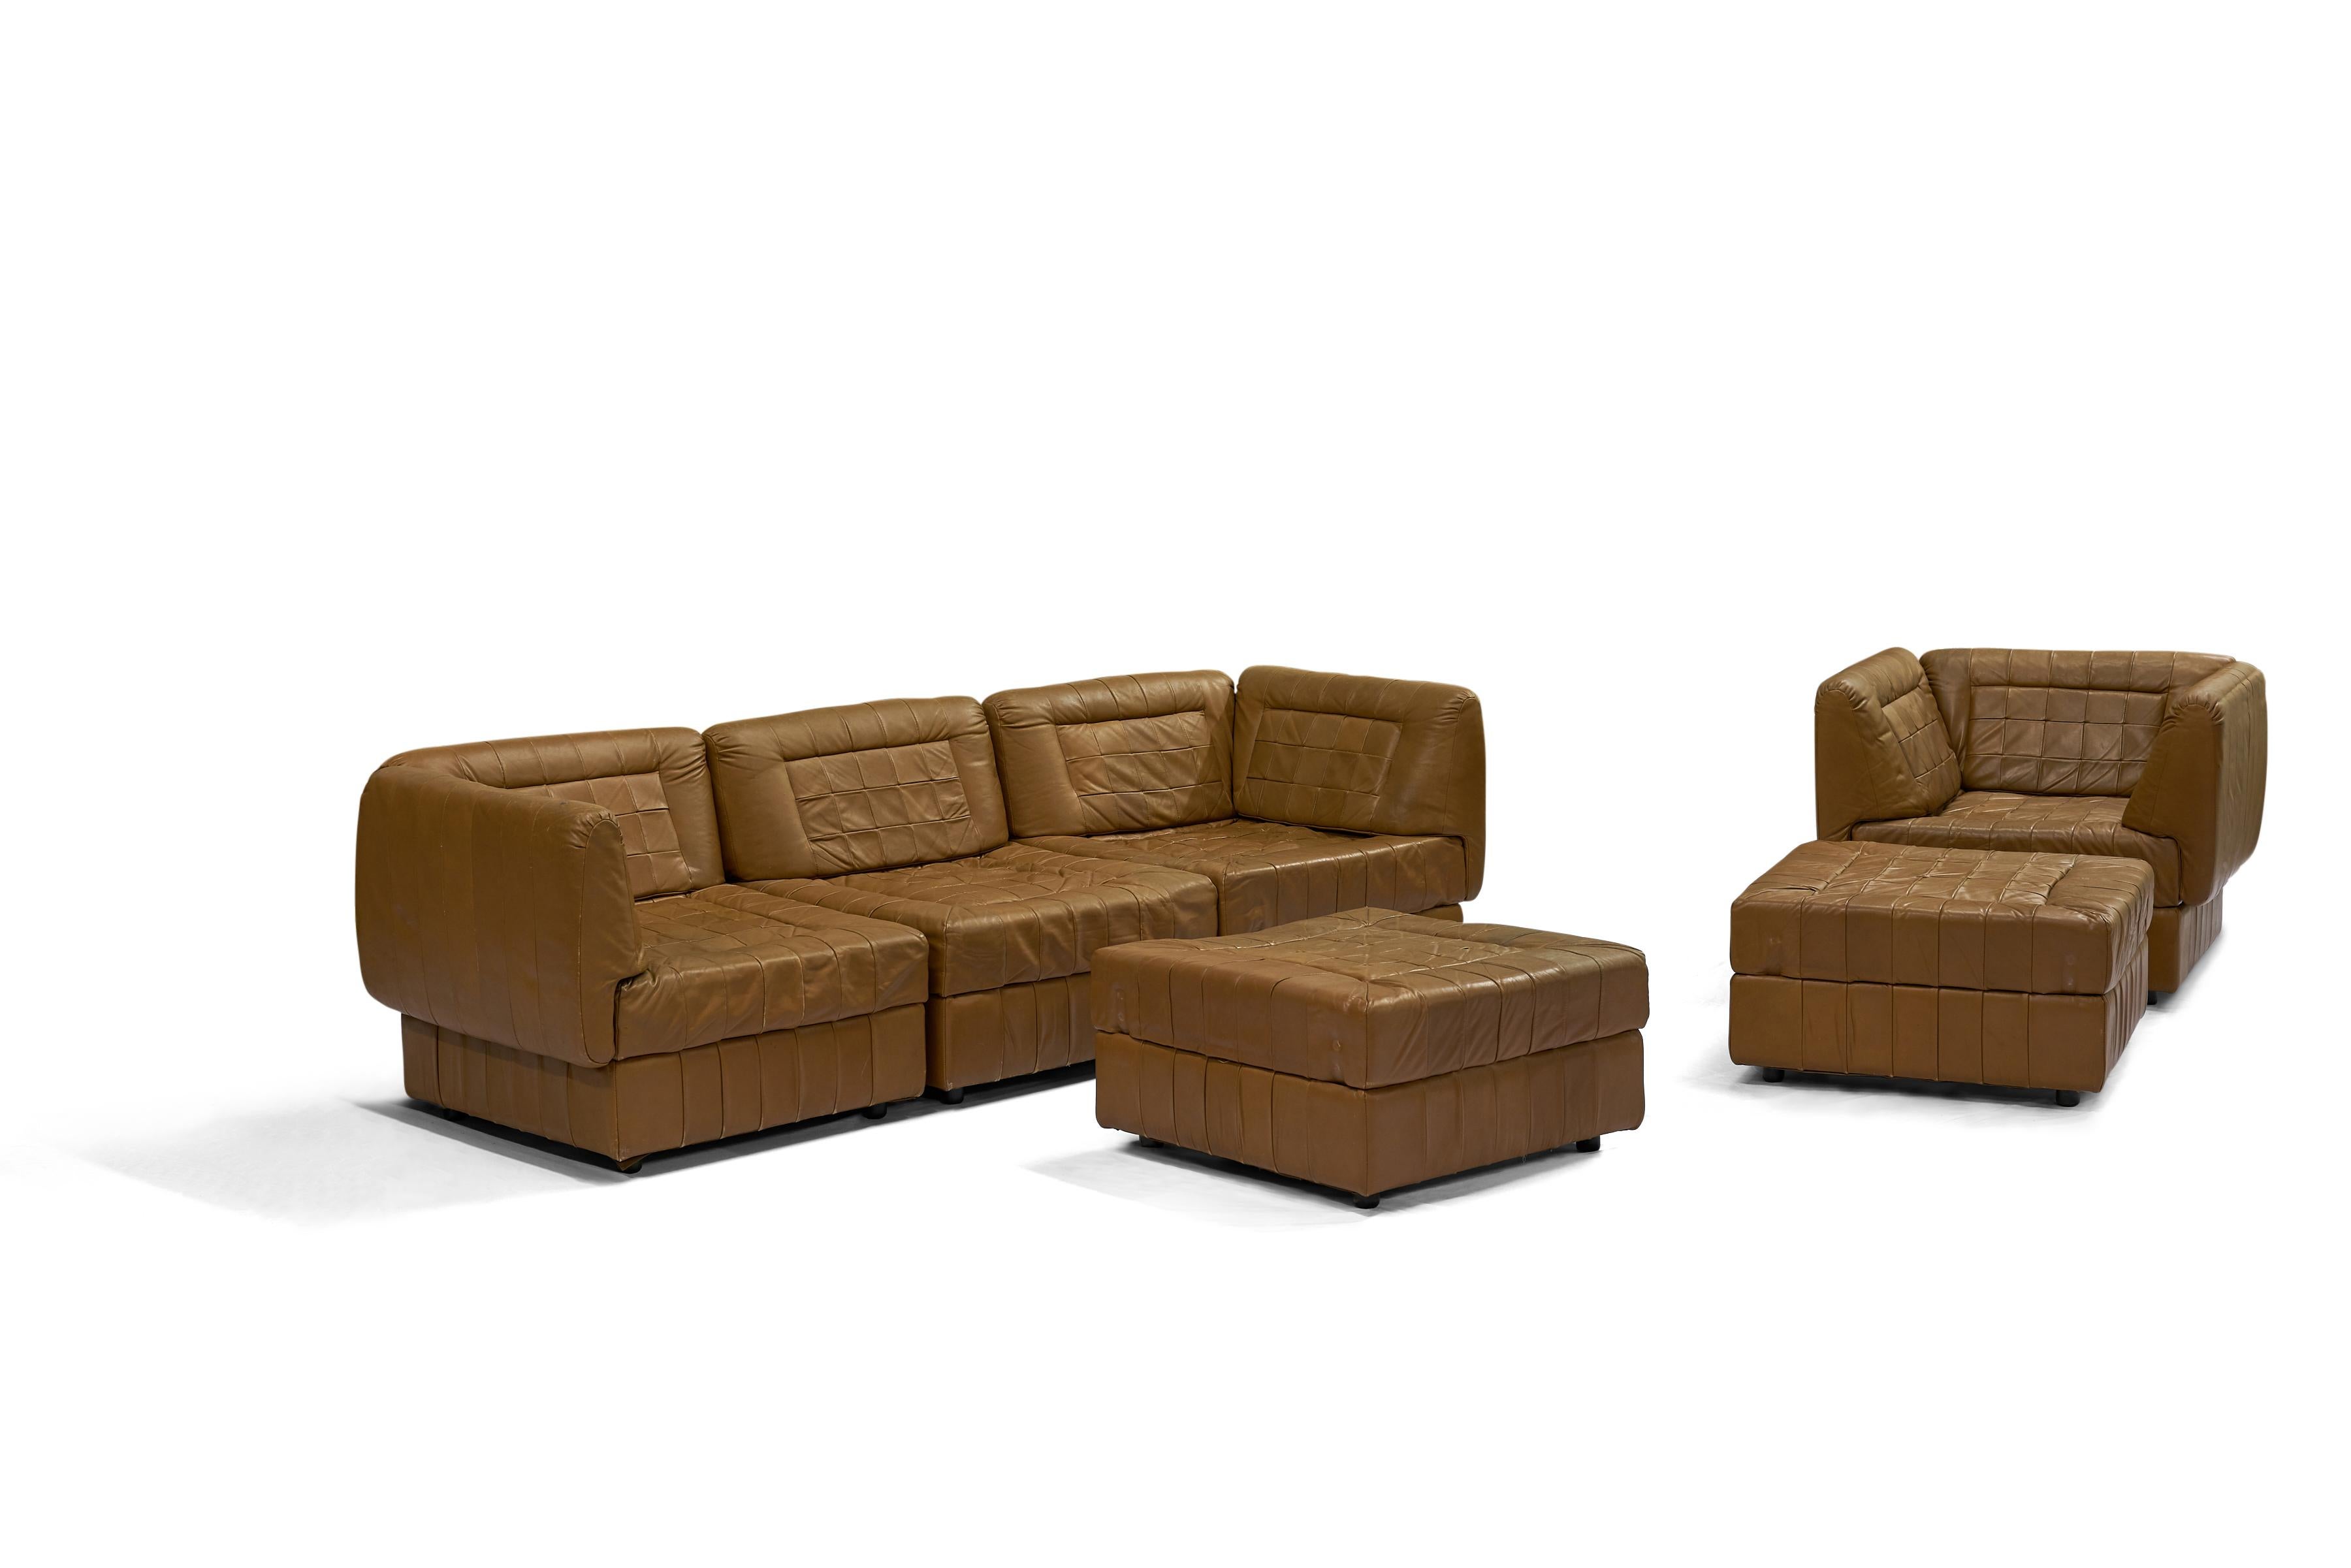 Brazilian Percival Lafer leather modular seating set For Sale